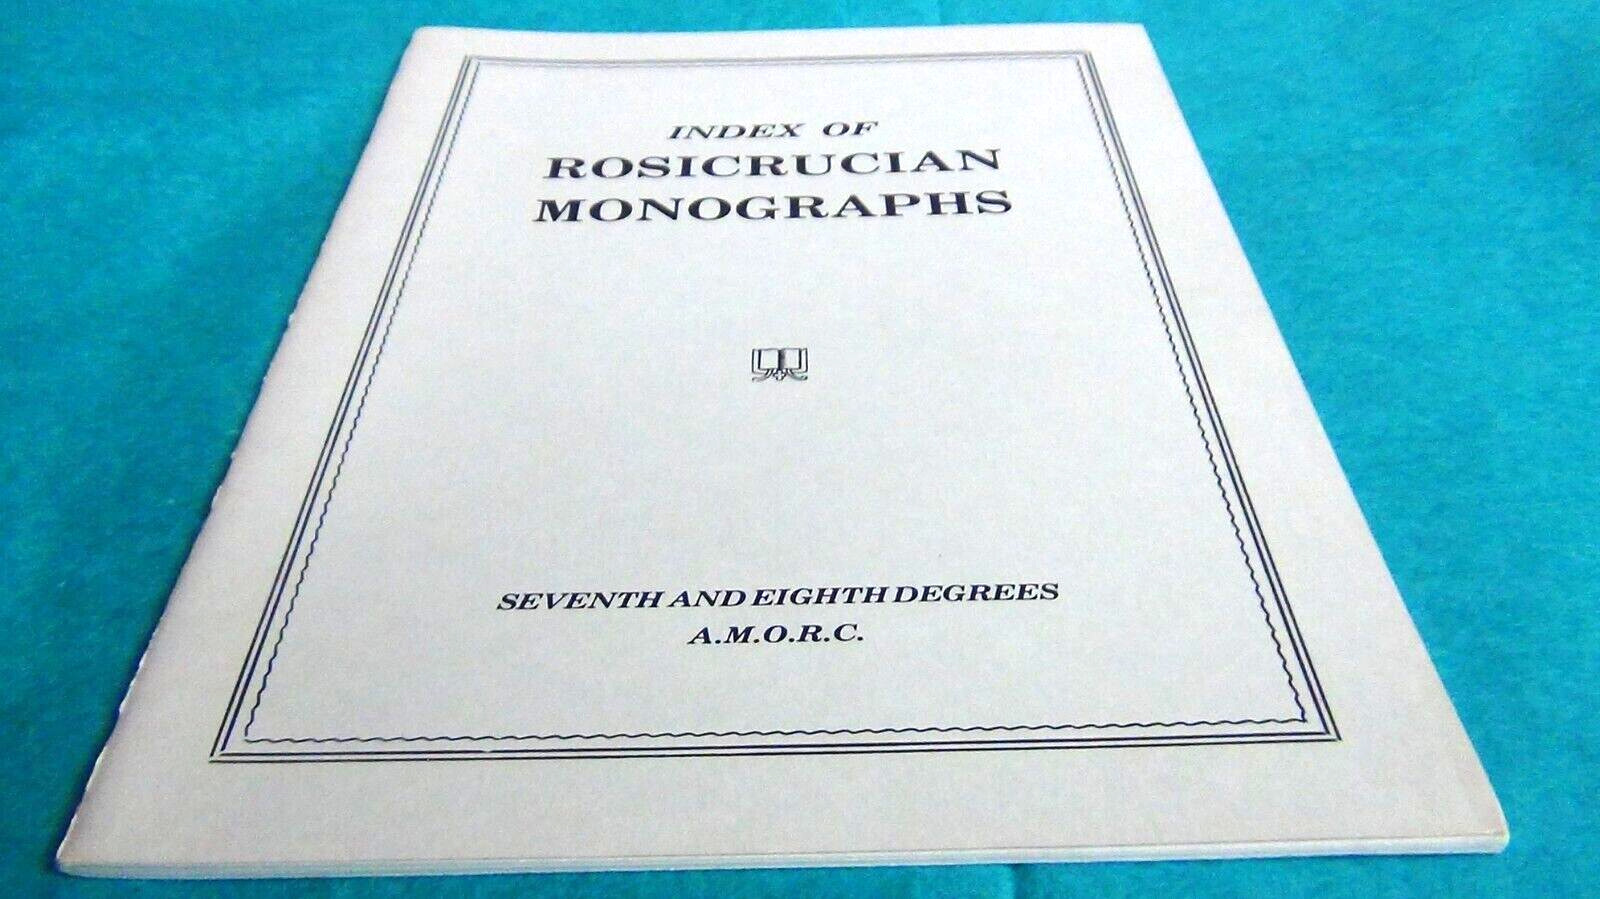 Index of Rosicrucian Monographs 7th & 8th Degrees A.M.O.R.C. 